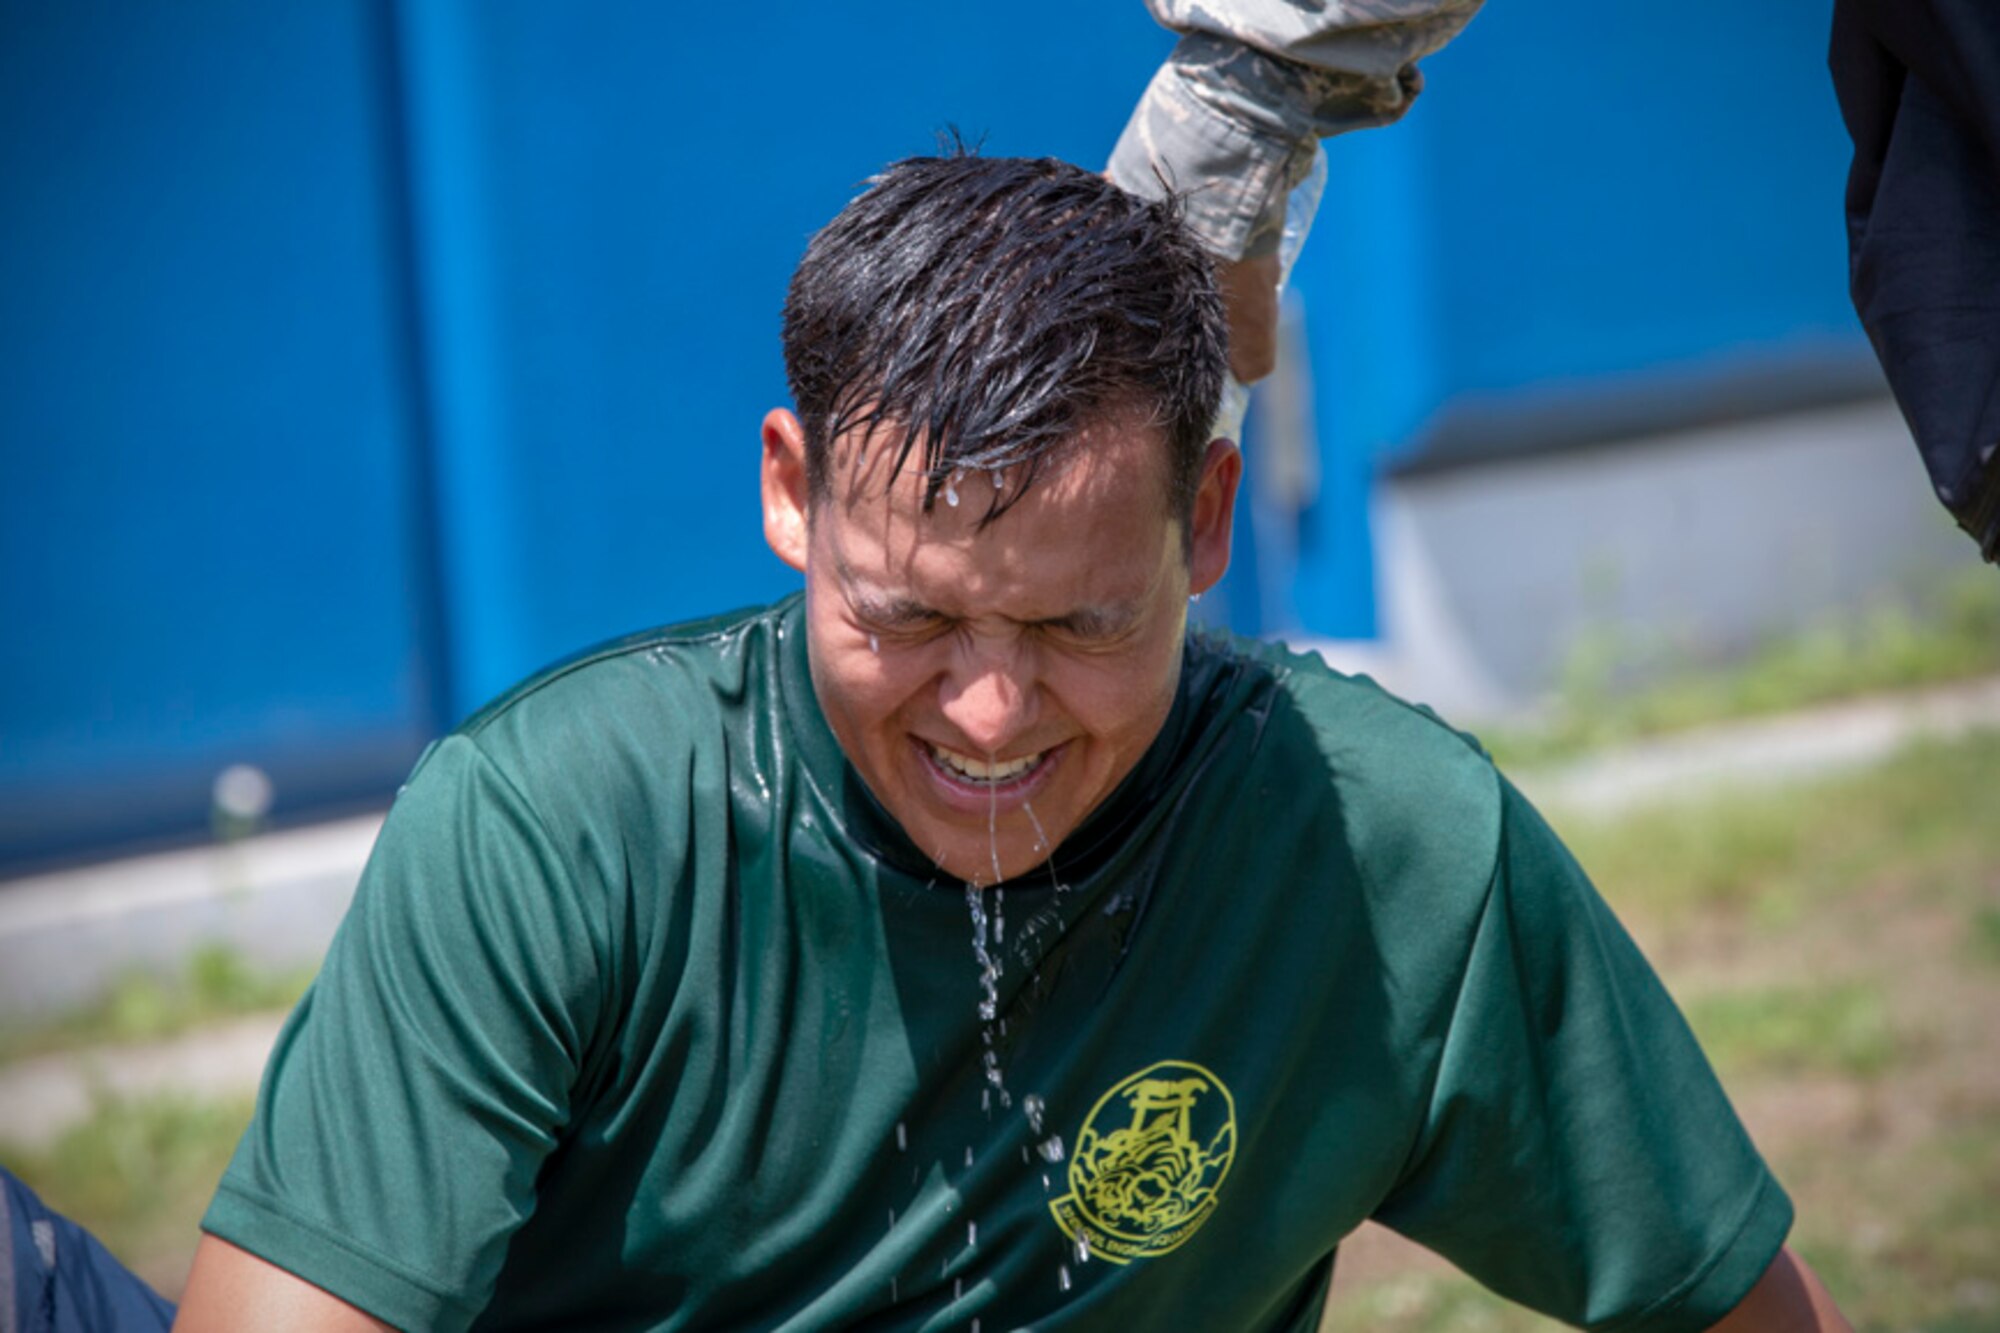 Airman 1st Class Matthew Byce, 374th Civil Engineer Squadron structural apprentice, gets drenched with a cold water after finished four-person relay during an Ability to Survive and Operate (ATSO) Rodeo